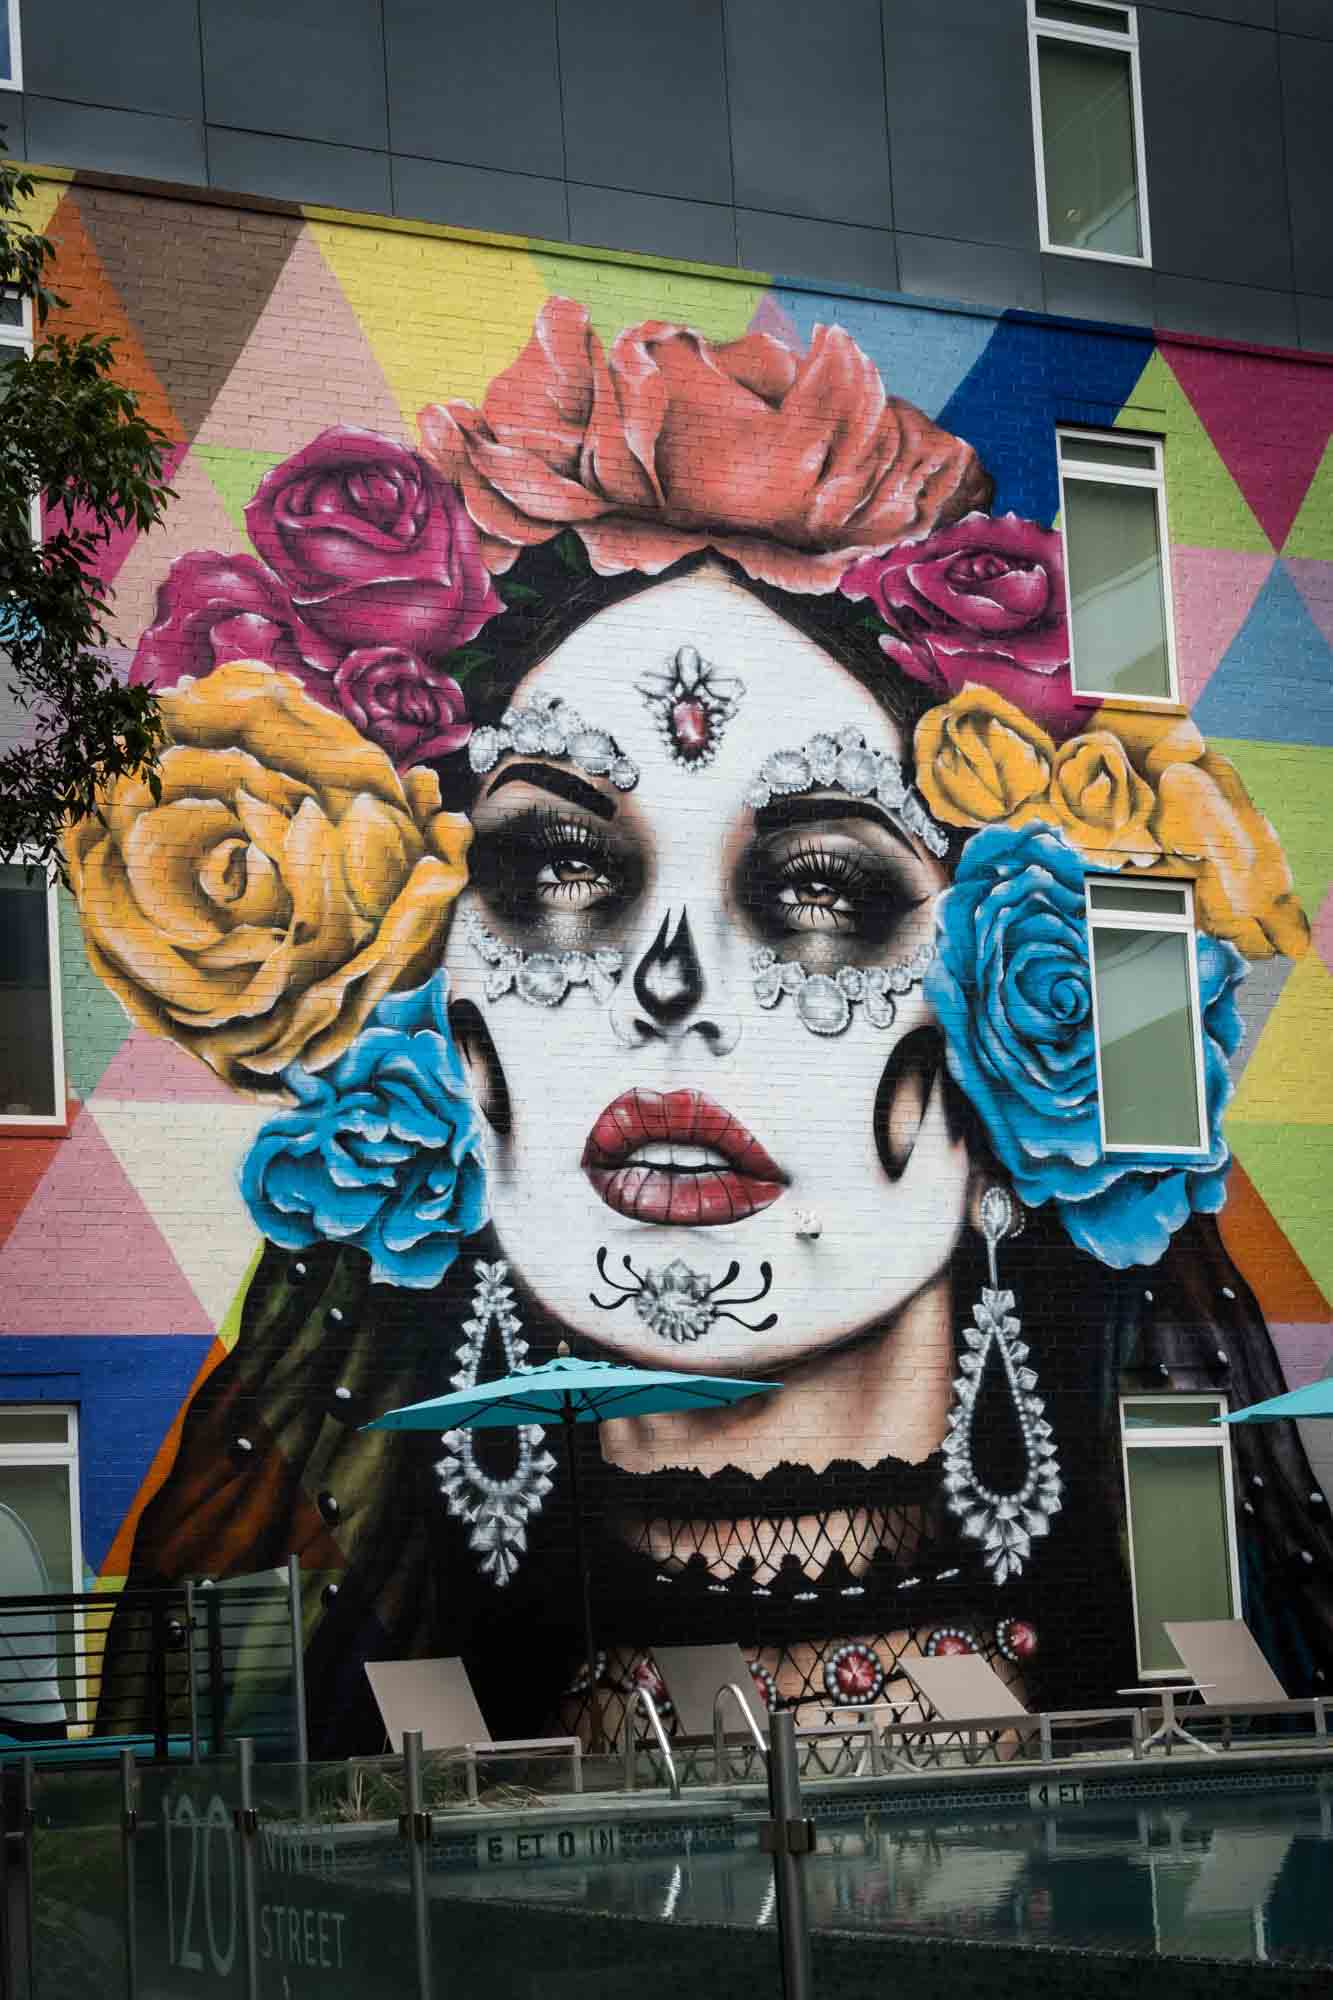 Colorful mural of woman wearing skull paint and colorful flowers in her hair in San Antonio